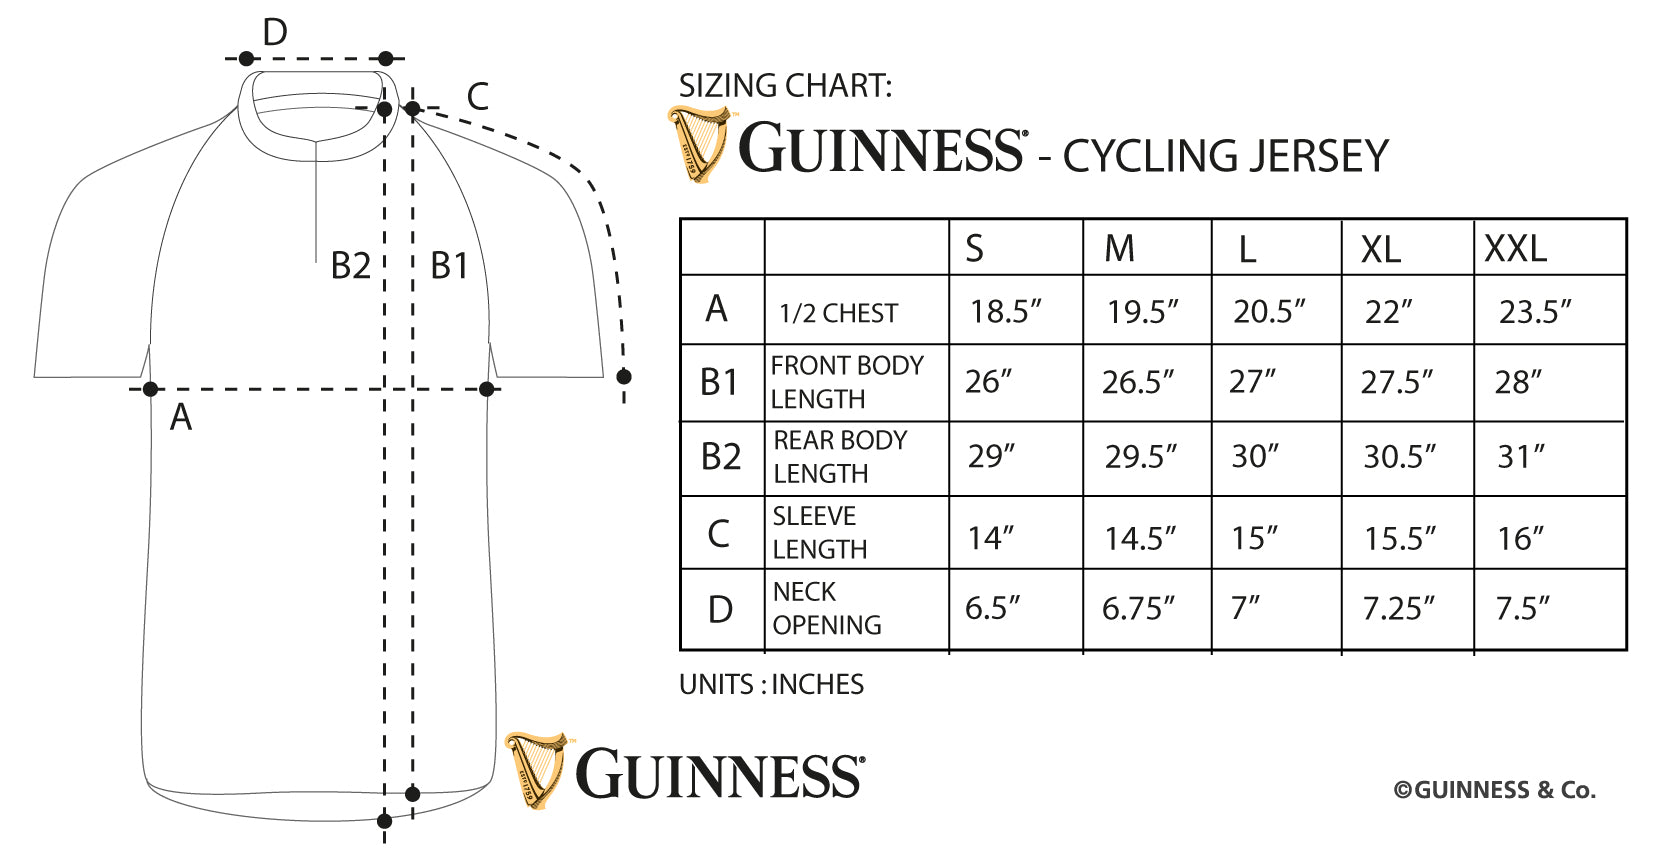 A Guinness Basic Cycling Jersey featuring a race cut, adorned with the iconic Guinness branding.